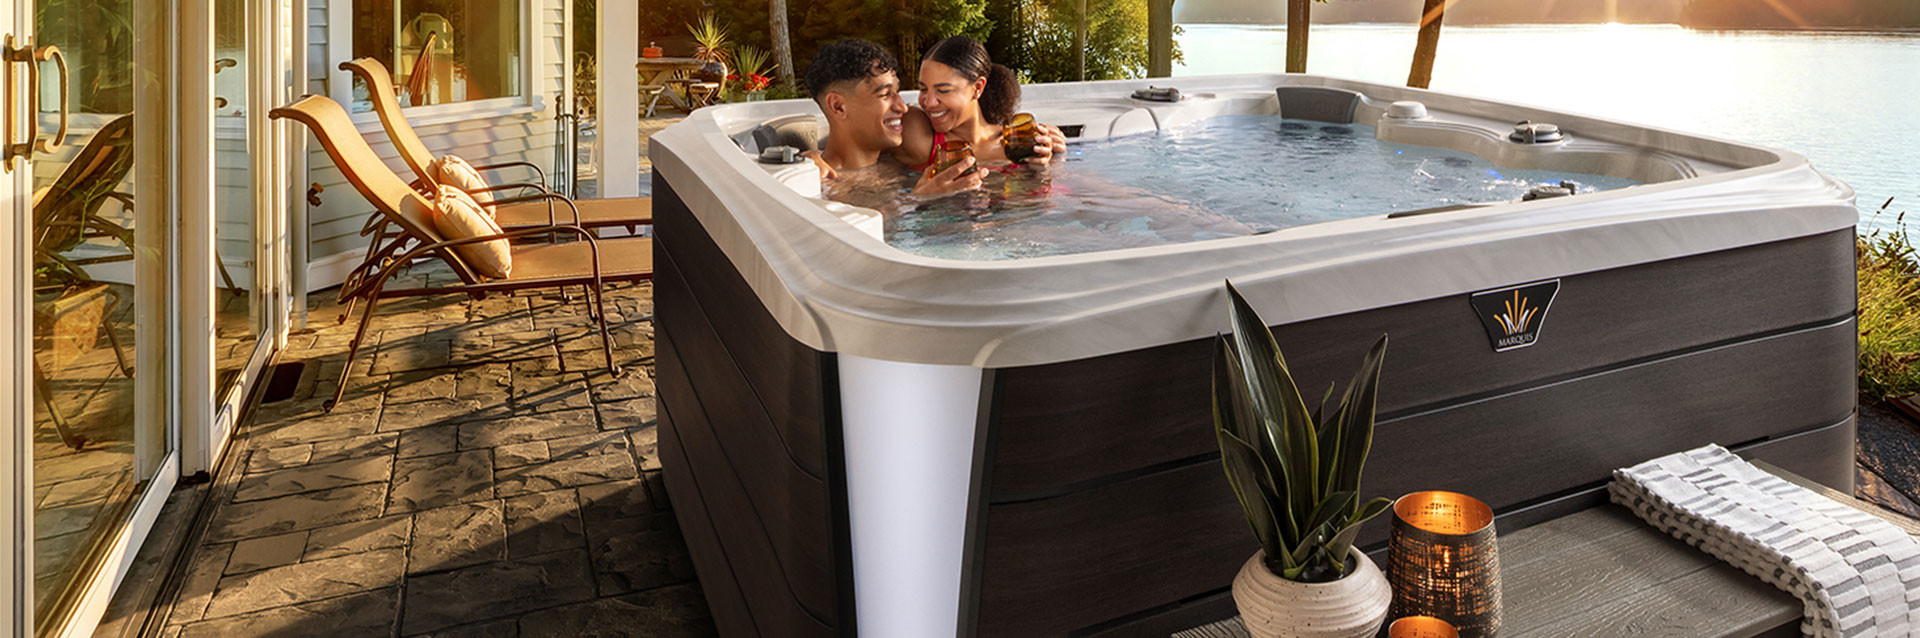 Hot Tub Setup: Electrical Requirements Simplified